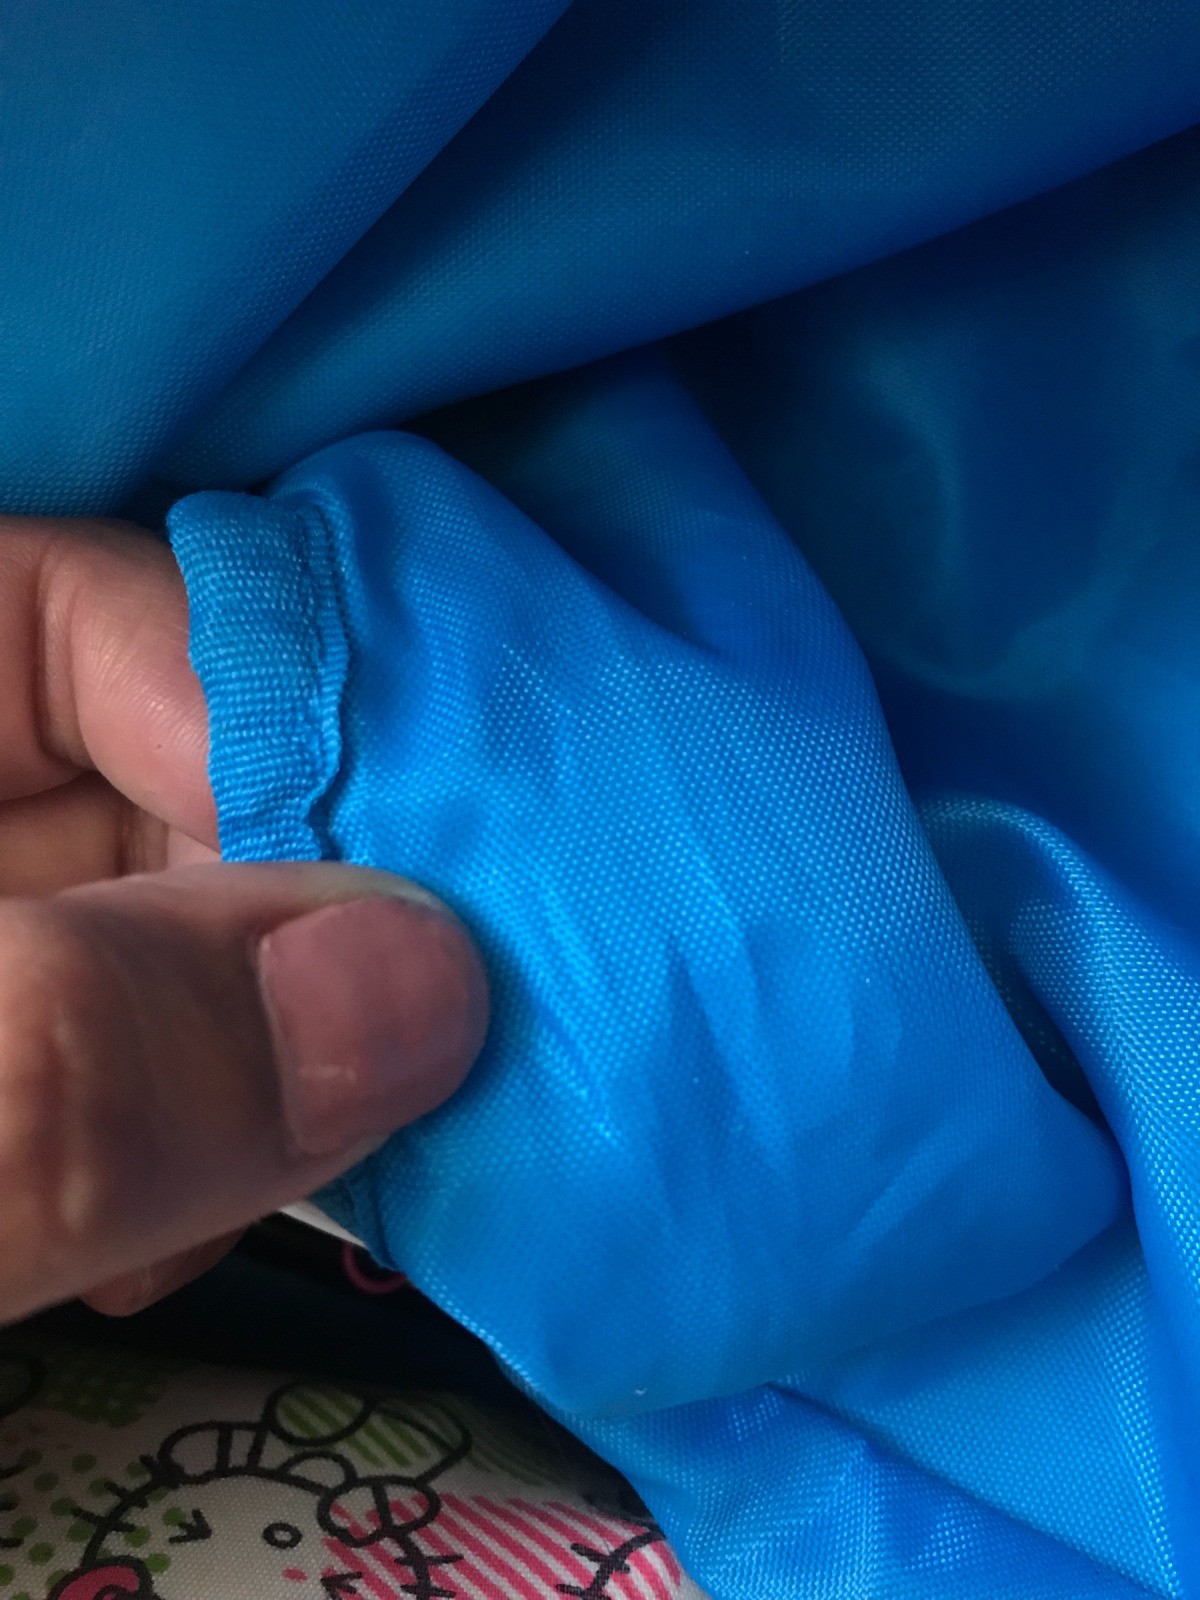 Repairing Tear in a Polyester Tote Bag? | ThriftyFun